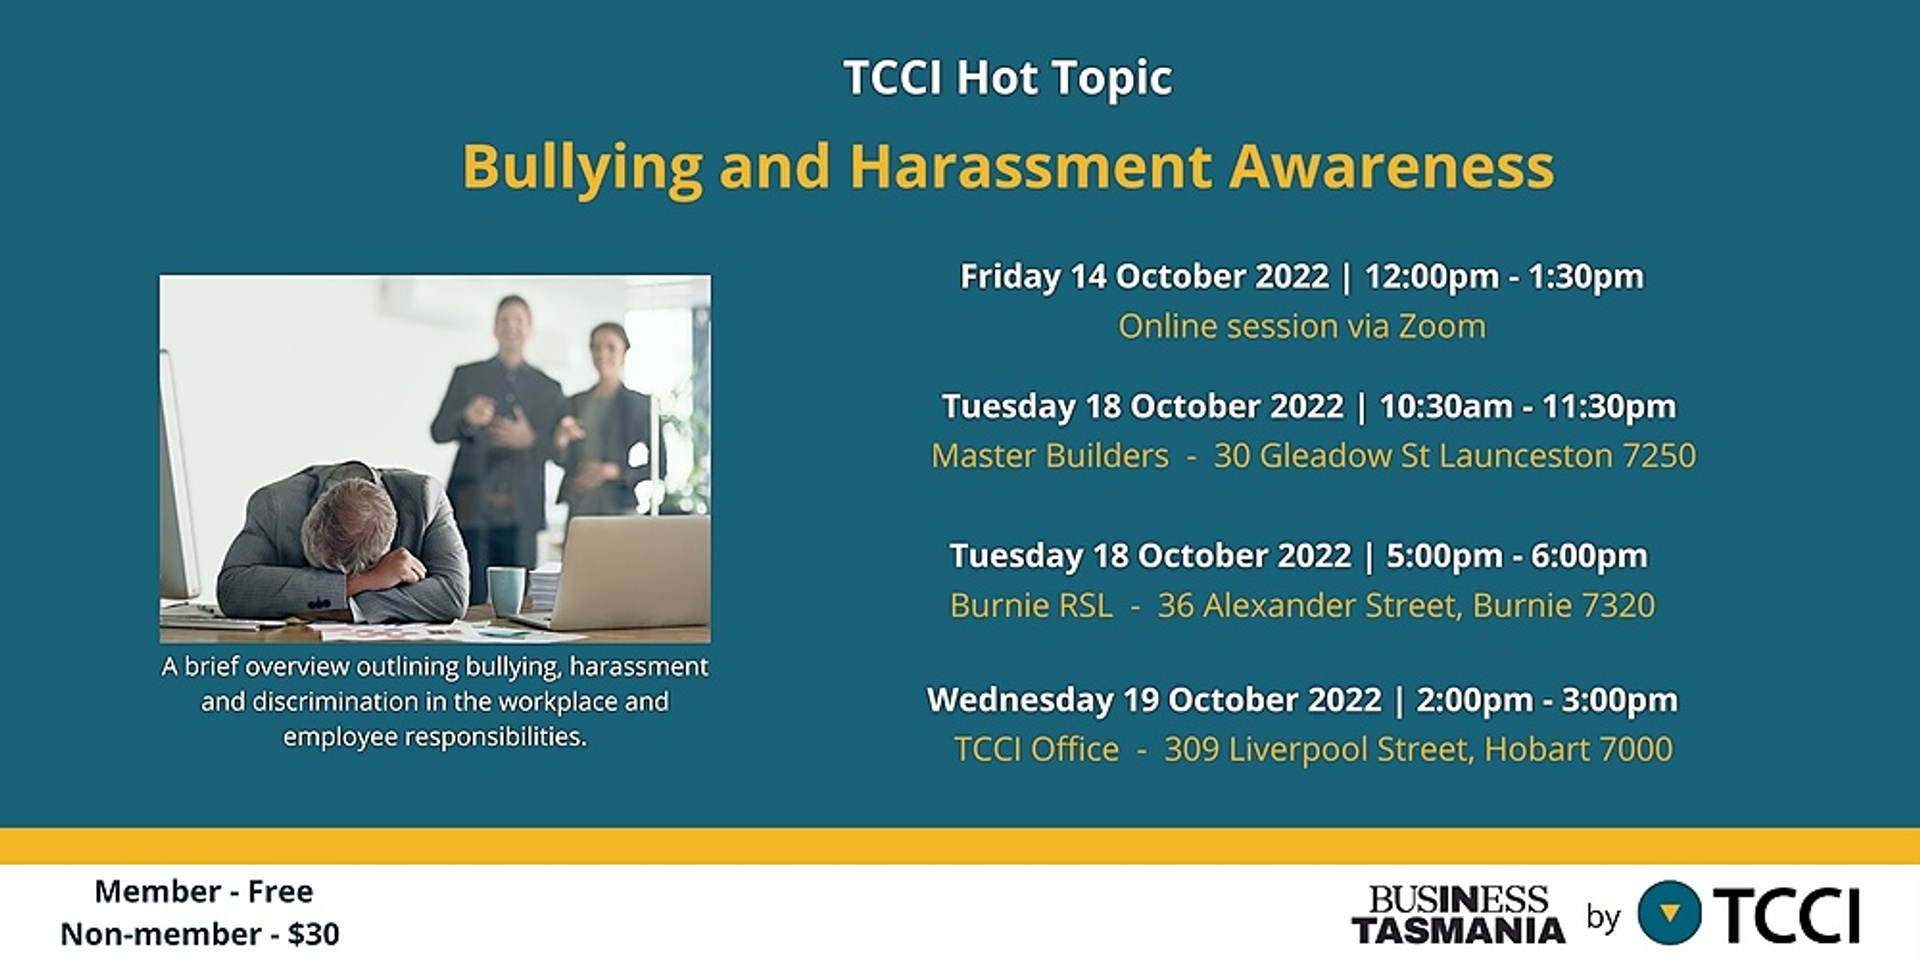 TCCI Hot Topic - Bullying and Harassment (Burnie)